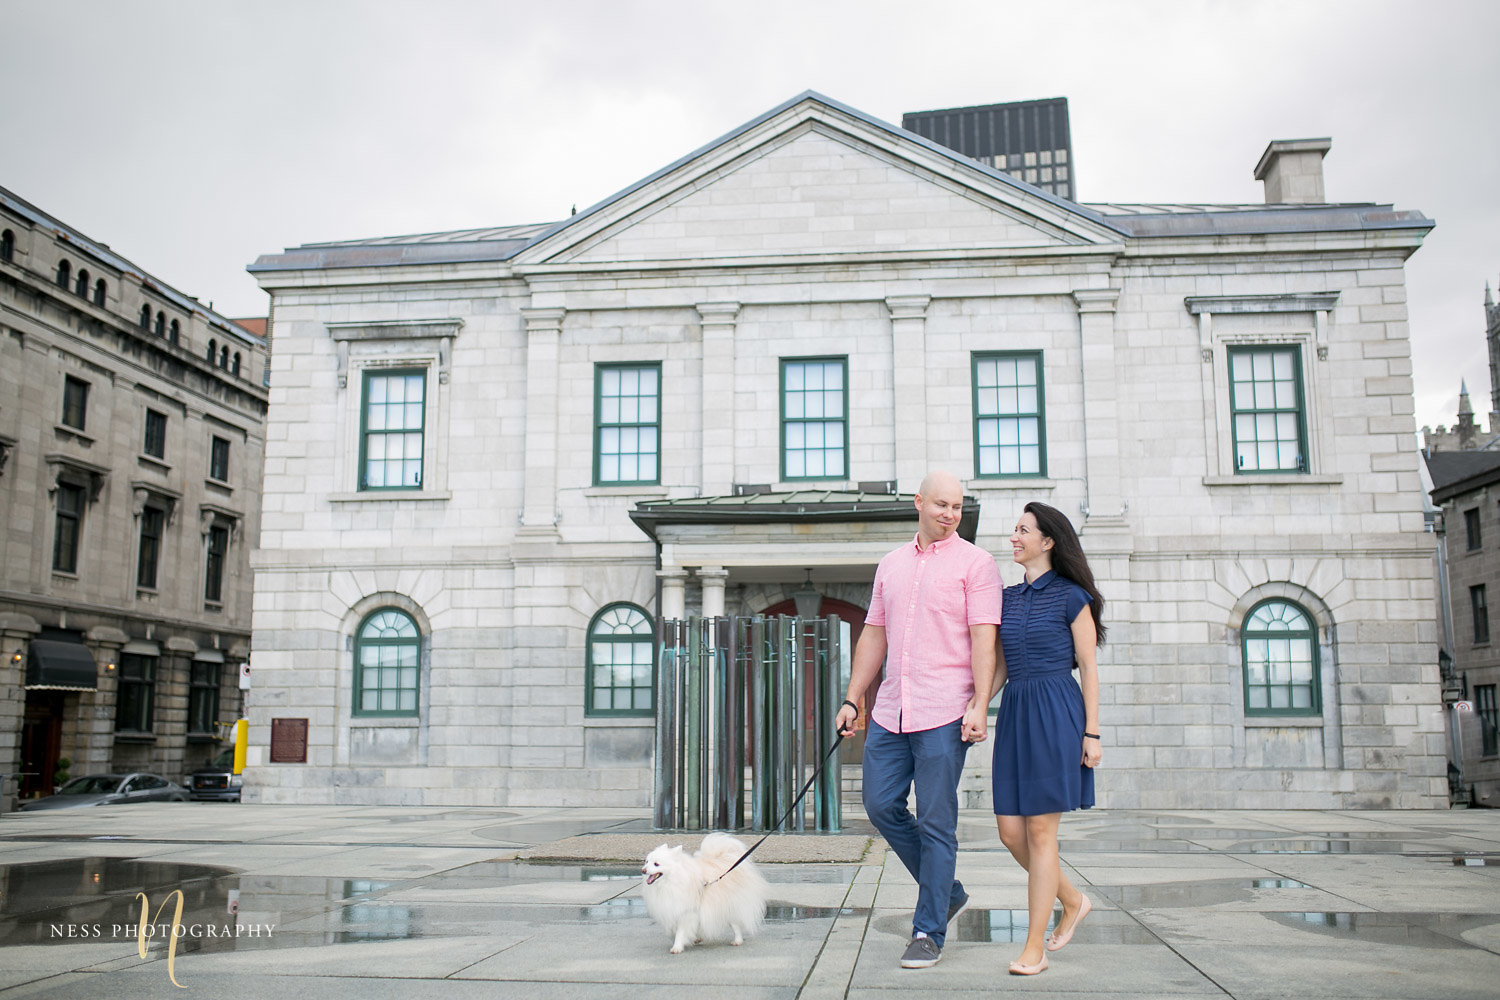 Adelina & Dan Engagement Photos Old Port Montreal with white dog By Ness Photography Wedding and Engagement Photographer 119.jpg